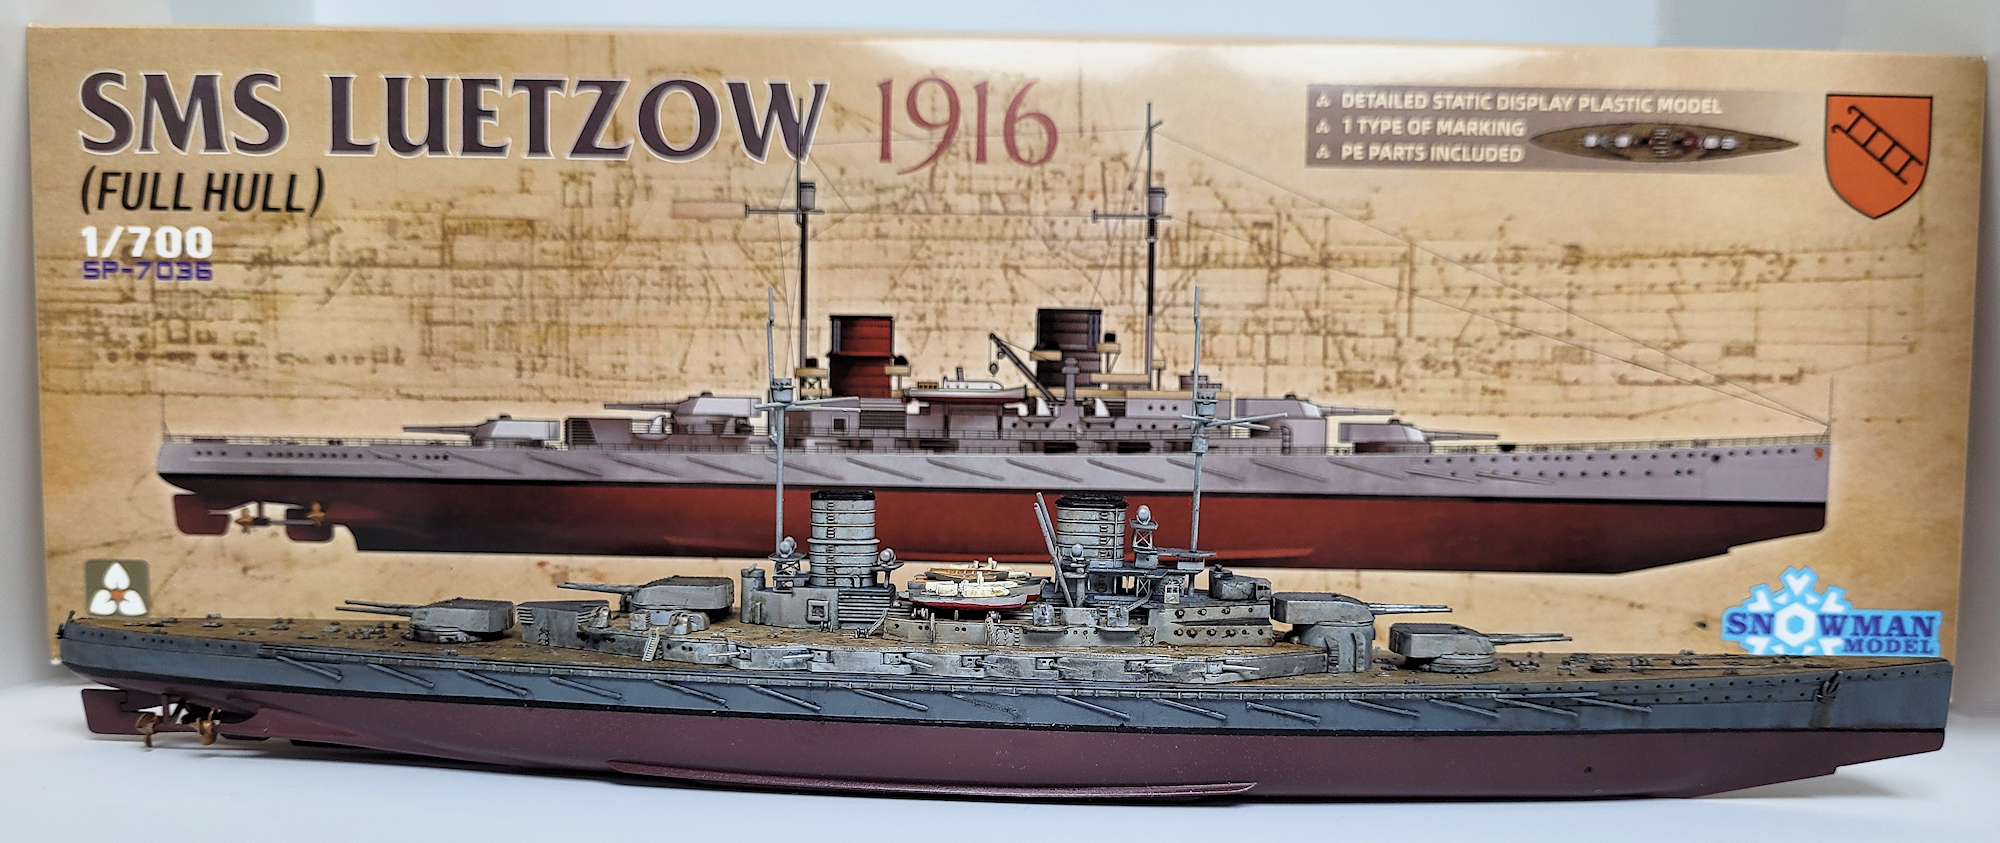 The Modelling News: Construction Review: SMS Lützow 1916 in 1 